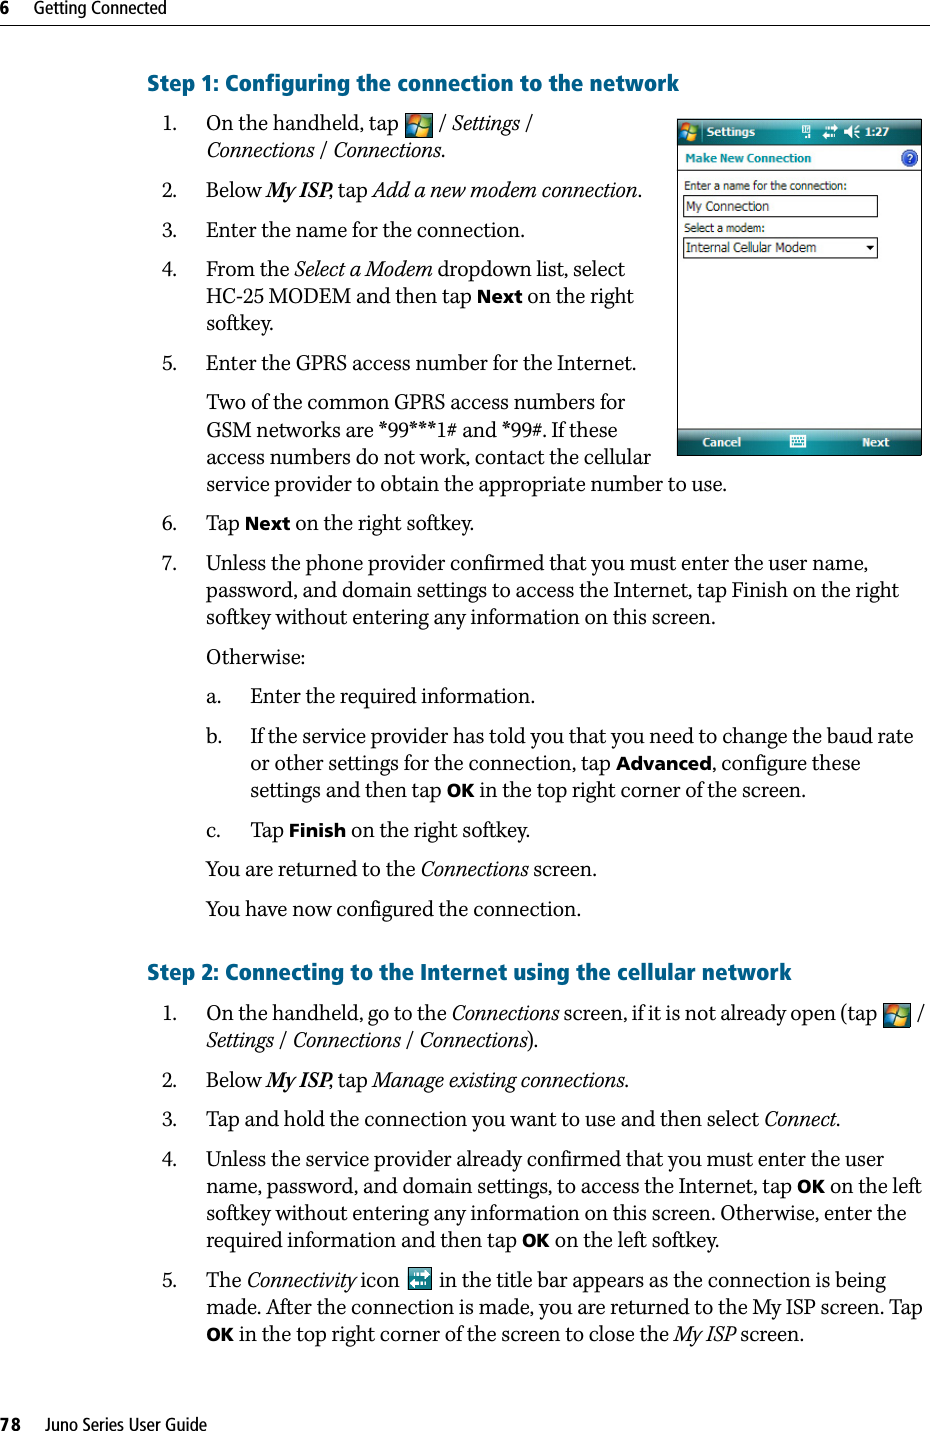 6     Getting Connected78     Juno Series User GuideStep 1: Configuring the connection to the network1. On the handheld, tap  / Settings / Connections /Connections.2. Below My ISP, tap Add a new modem connection. 3. Enter the name for the connection.4. From the Select a Modem dropdown list, select HC-25 MODEM and then tap Next on the right softkey.5. Enter the GPRS access number for the Internet.Two of the common GPRS access numbers for GSM networks are *99***1# and *99#. If these access numbers do not work, contact the cellular service provider to obtain the appropriate number to use. 6. Tap Next on the right softkey.7. Unless the phone provider confirmed that you must enter the user name, password, and domain settings to access the Internet, tap Finish on the right softkey without entering any information on this screen.Otherwise:a. Enter the required information.b. If the service provider has told you that you need to change the baud rate or other settings for the connection, tap Advanced, configure these settings and then tap OK in the top right corner of the screen.c. Tap Finish on the right softkey.You are returned to the Connections screen.You have now configured the connection.Step 2: Connecting to the Internet using the cellular network1. On the handheld, go to the Connections screen, if it is not already open (tap  / Settings / Connections /Connections).2. Below My ISP, tap Manage existing connections.3. Tap and hold the connection you want to use and then select Connect.4. Unless the service provider already confirmed that you must enter the user name, password, and domain settings, to access the Internet, tap OK on the left softkey without entering any information on this screen. Otherwise, enter the required information and then tap OK on the left softkey.5. The Connectivity icon   in the title bar appears as the connection is being made. After the connection is made, you are returned to the My ISP screen. Tap OK in the top right corner of the screen to close the My ISP screen.